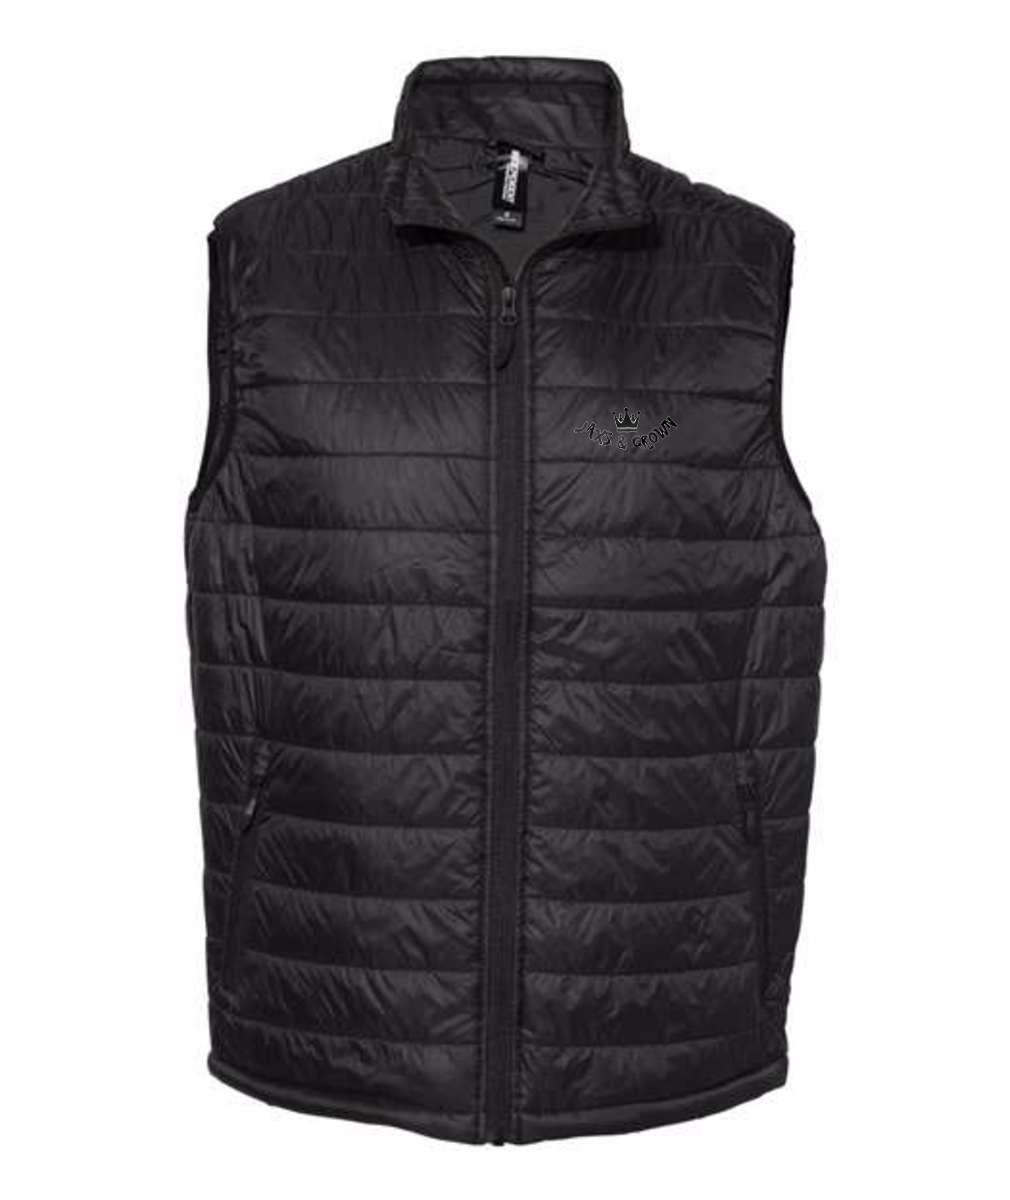 Jaxs n crown print Independent Trading Co. - Puffer Vest Embroidered